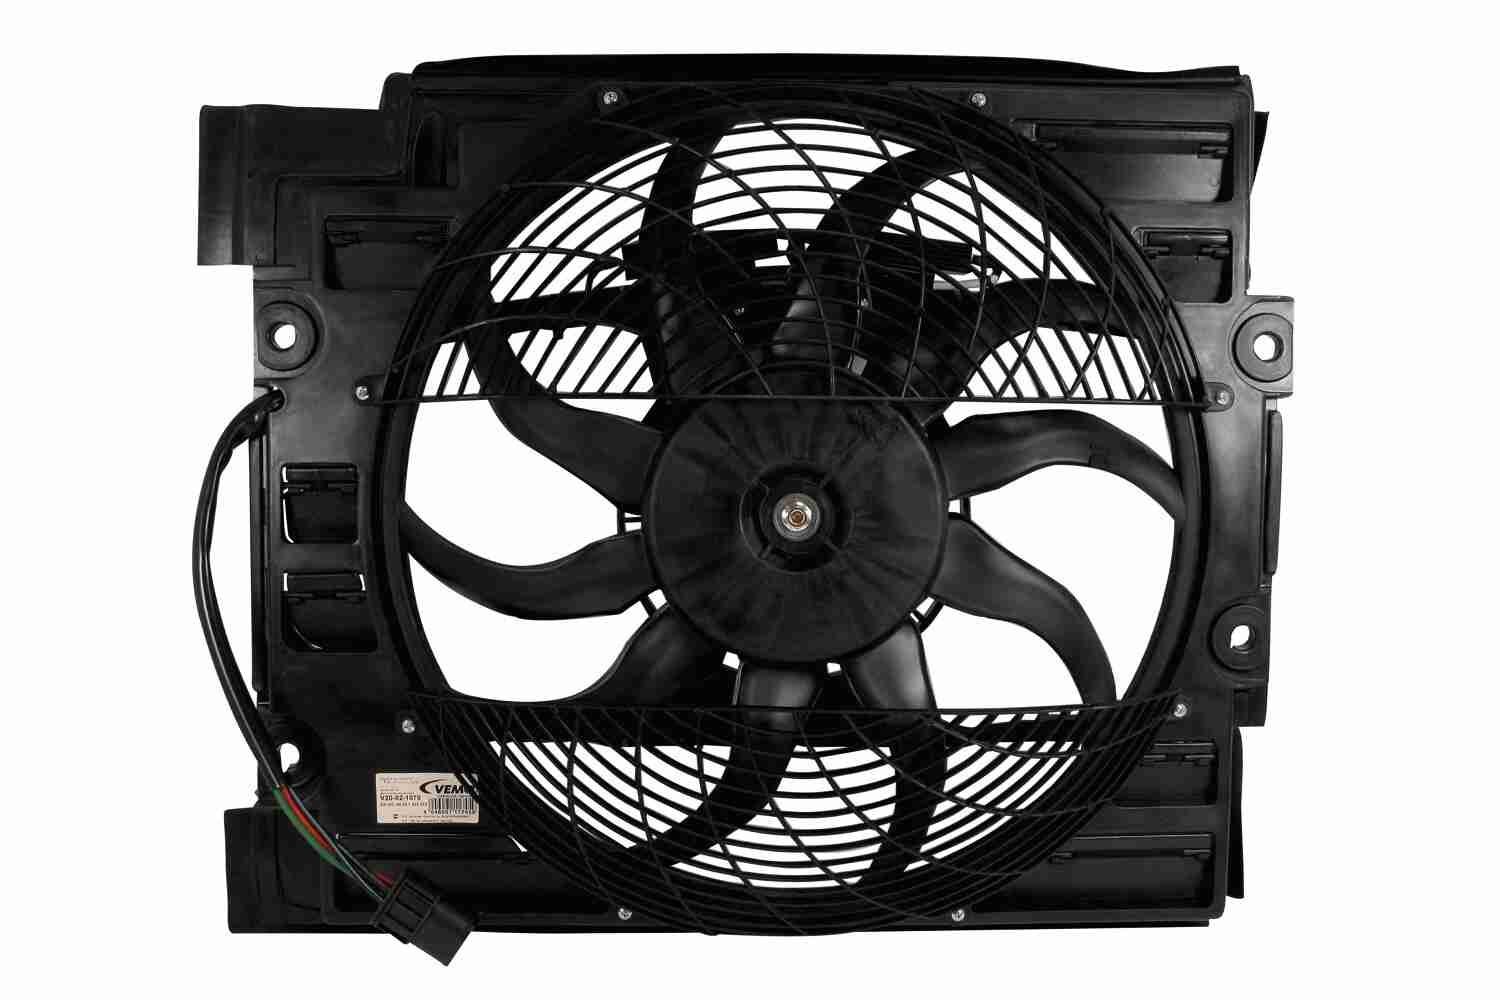 Ford Fan, A / C condenser VEMO V20-02-1070 at a good price